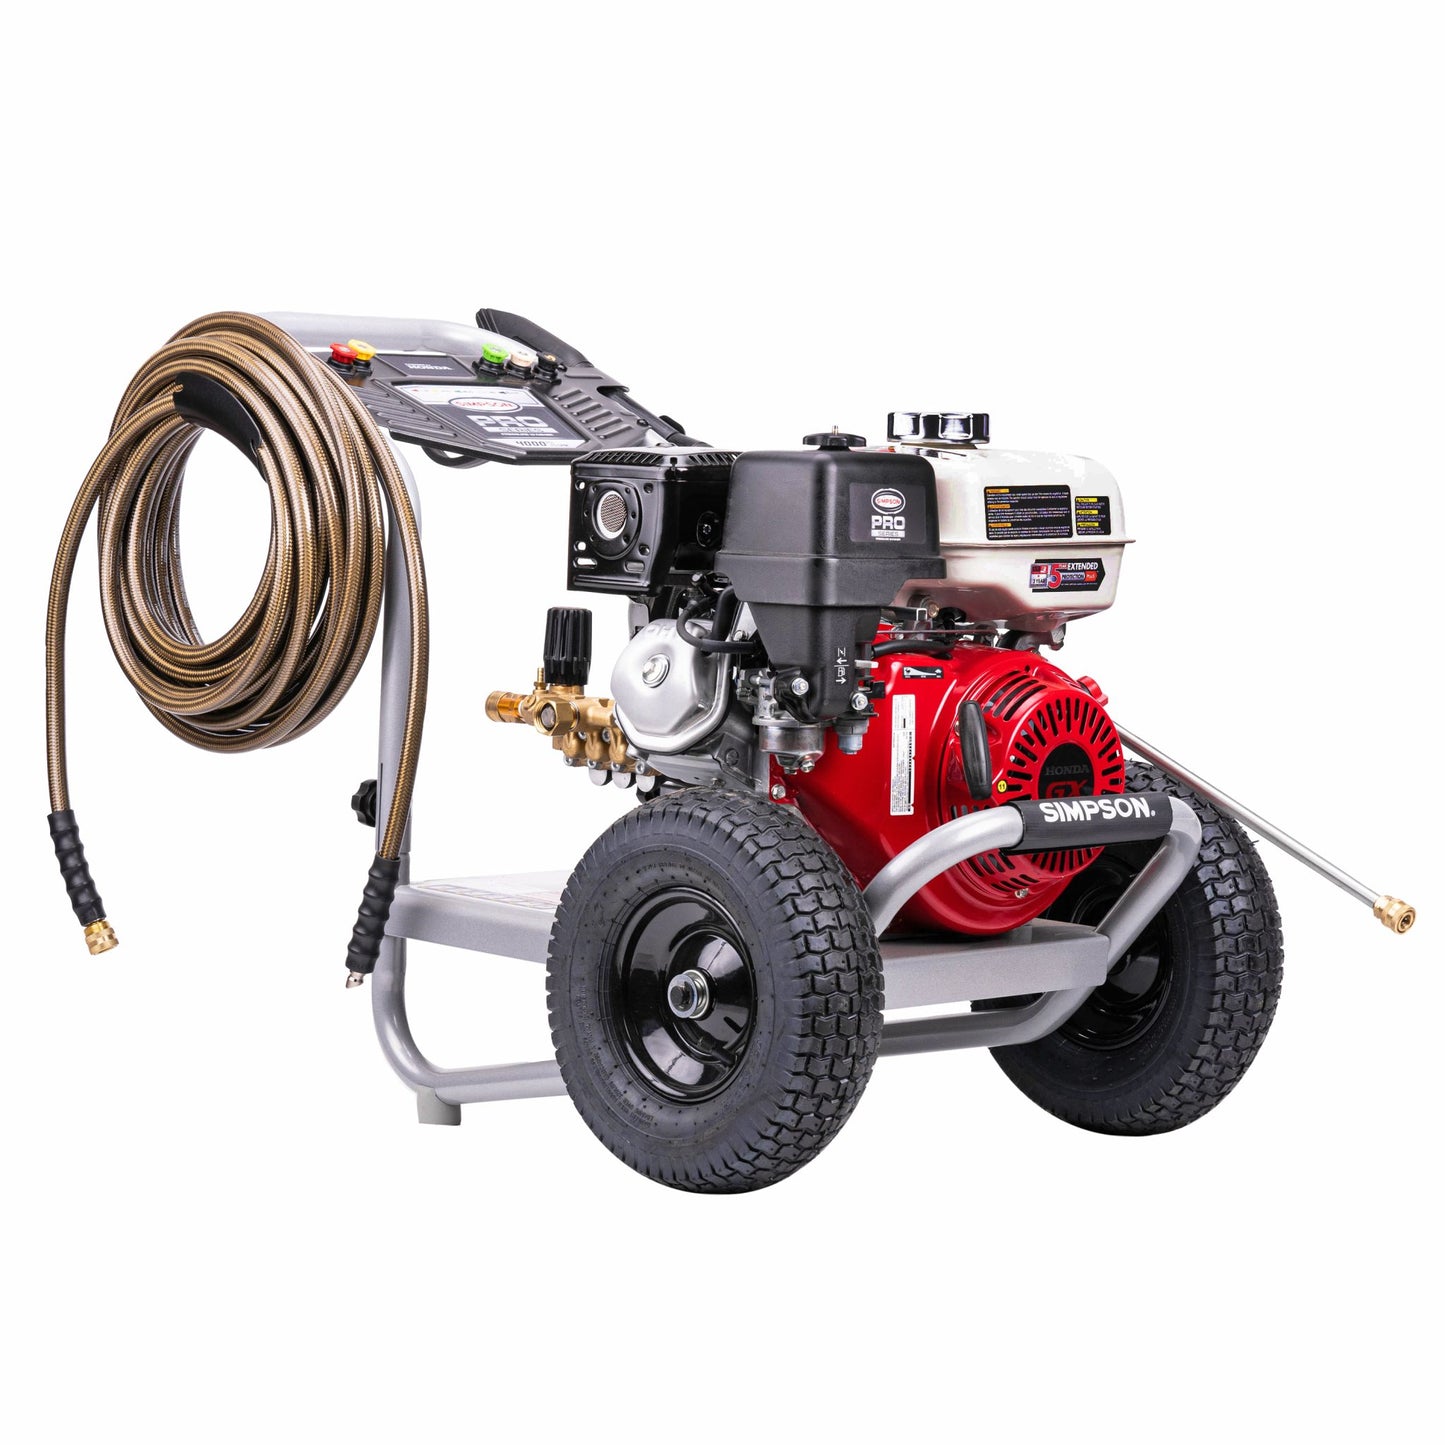 Simpson 4000 PSI at 3.5 GPM Honda GX270 with AAA Triplex Pump Cold Water Professional Gas Pressure Washer  Factory Serviced